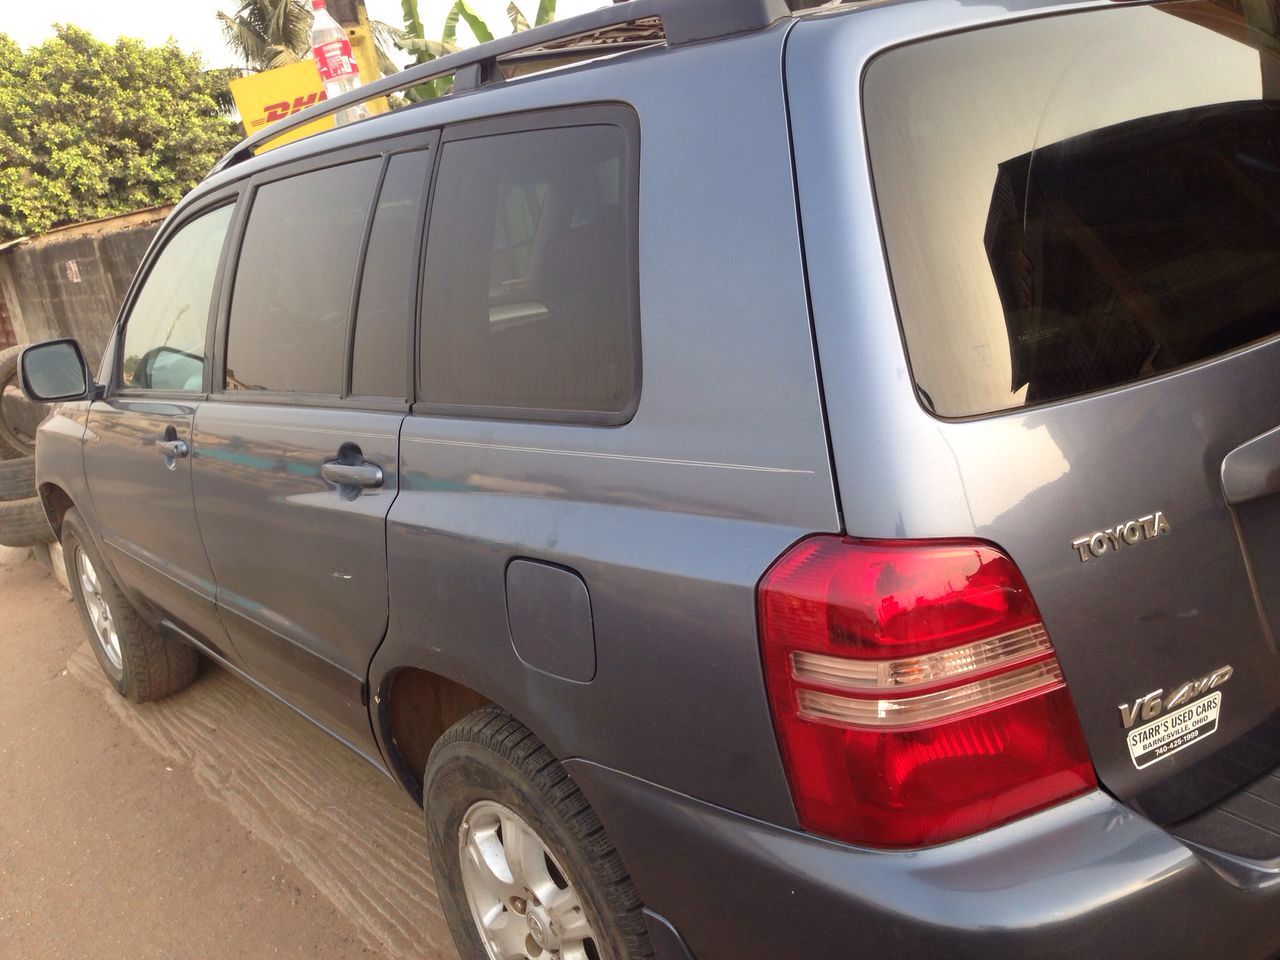 This Rarely Used 04 Toyota Highlander (3 Row) Available For Sale(price